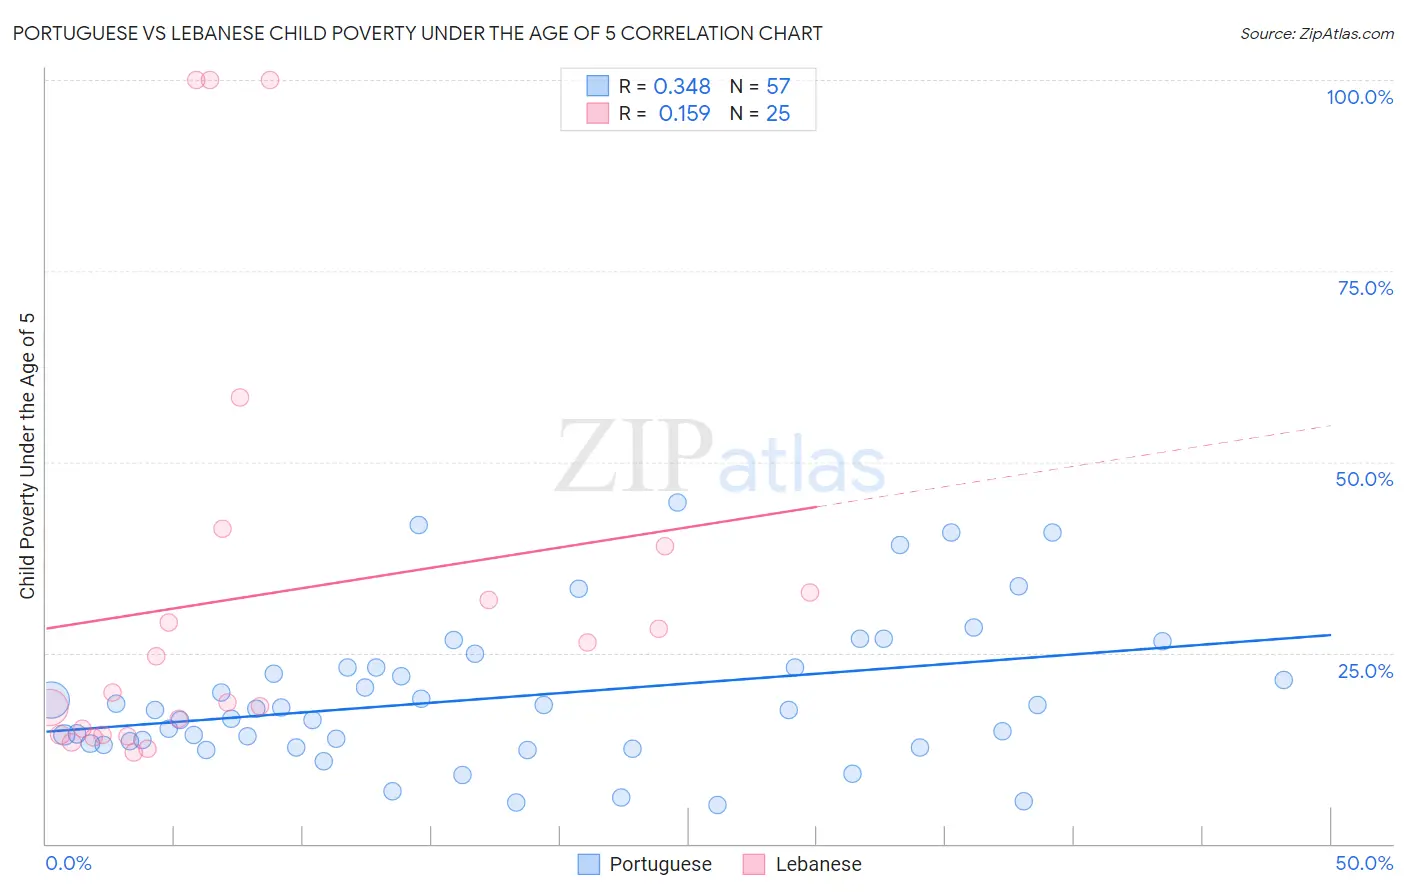 Portuguese vs Lebanese Child Poverty Under the Age of 5